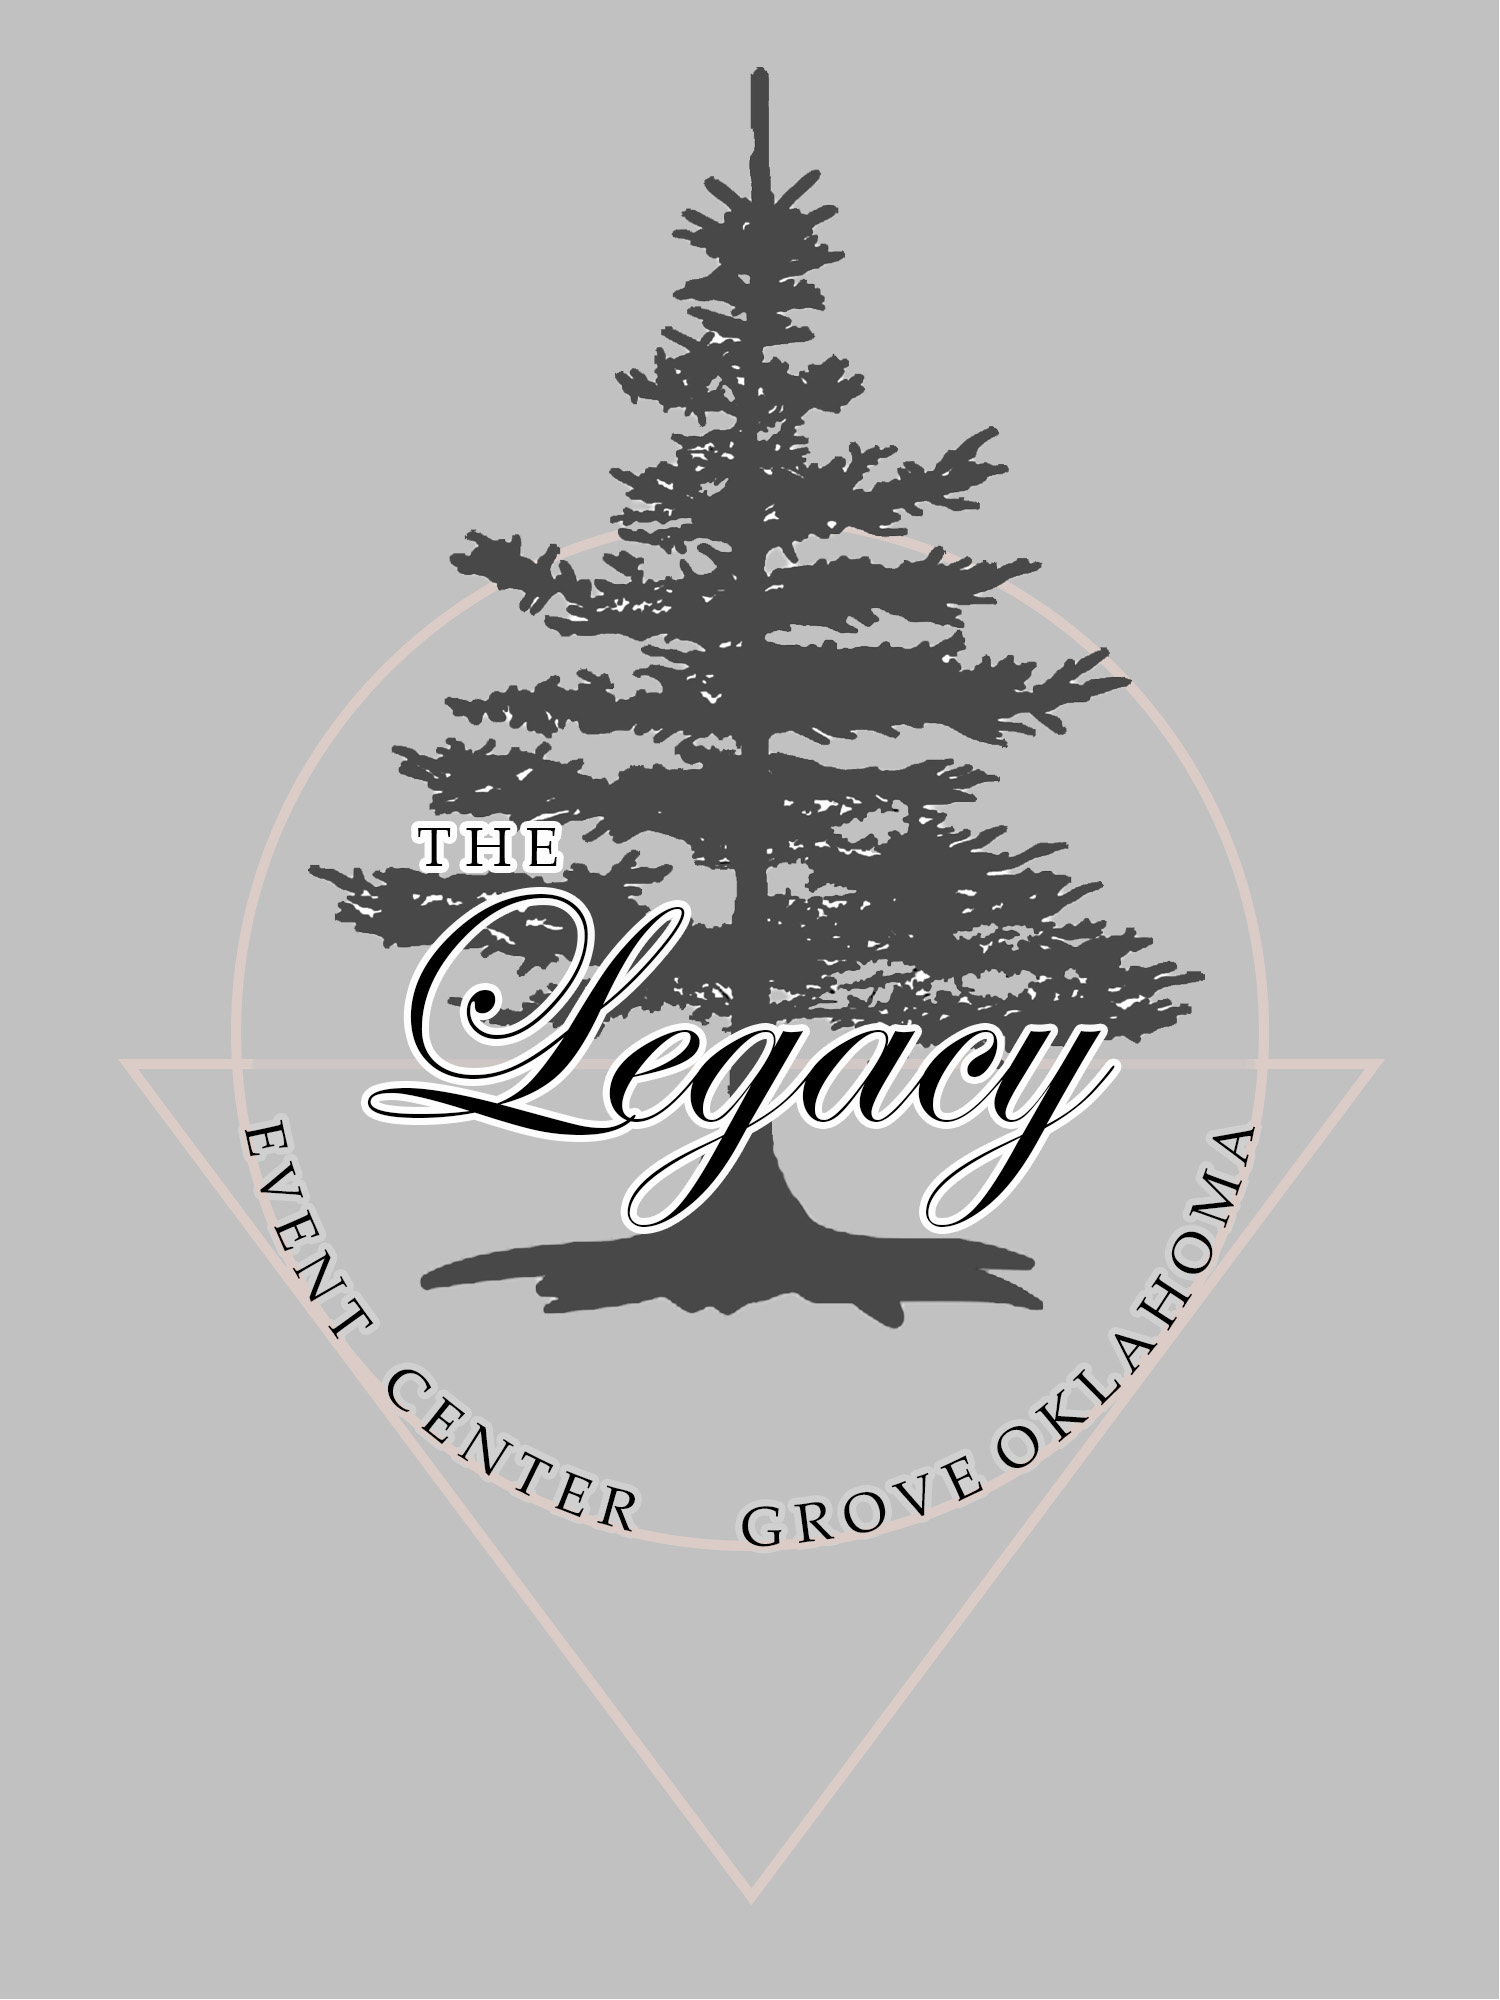 The Legacy Event Center